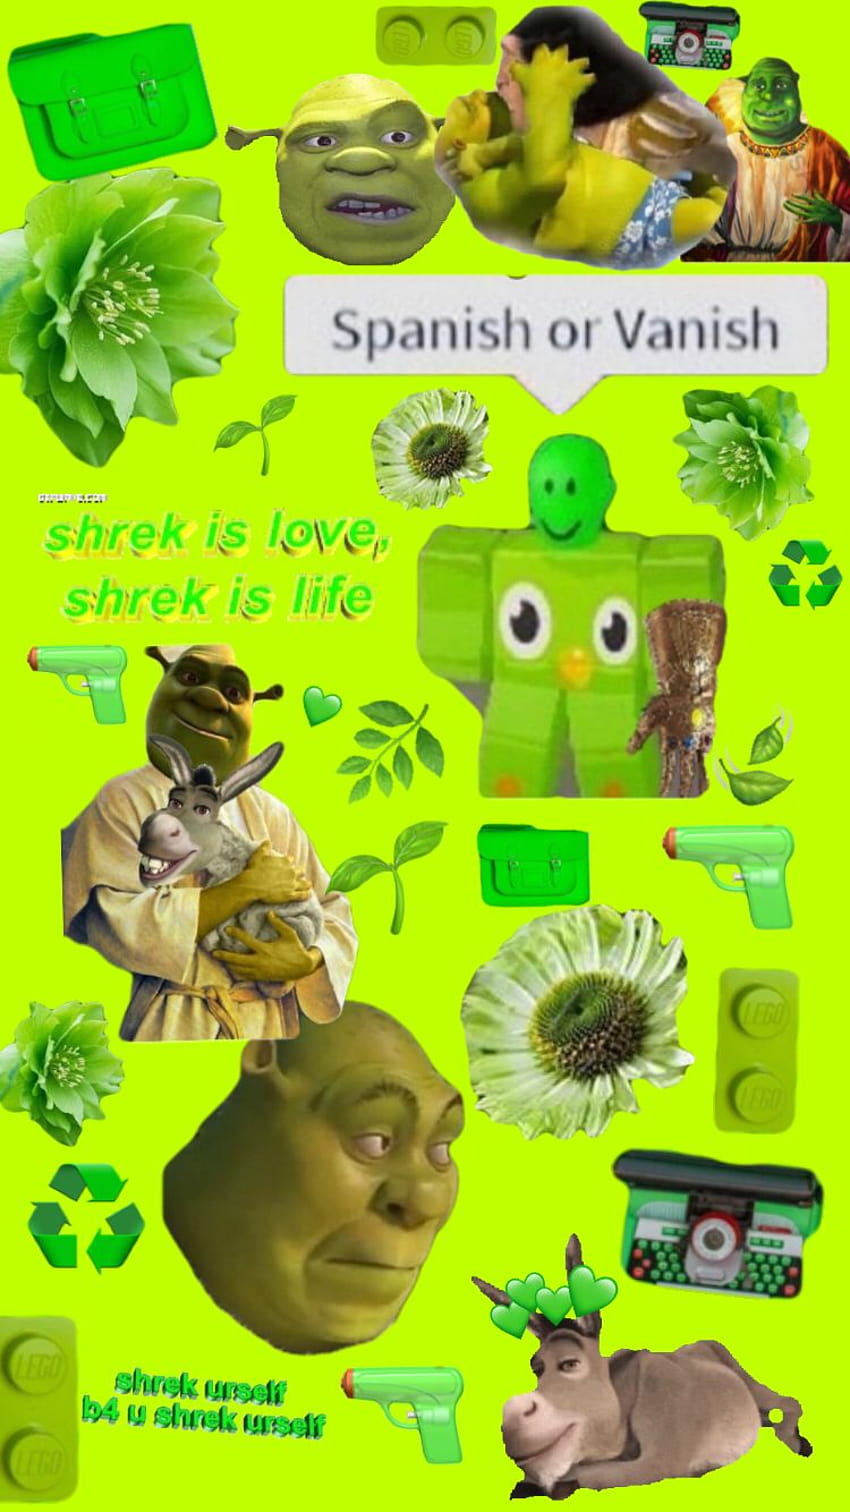 Spanish or Vanish is a new game on Roblox - Shrek